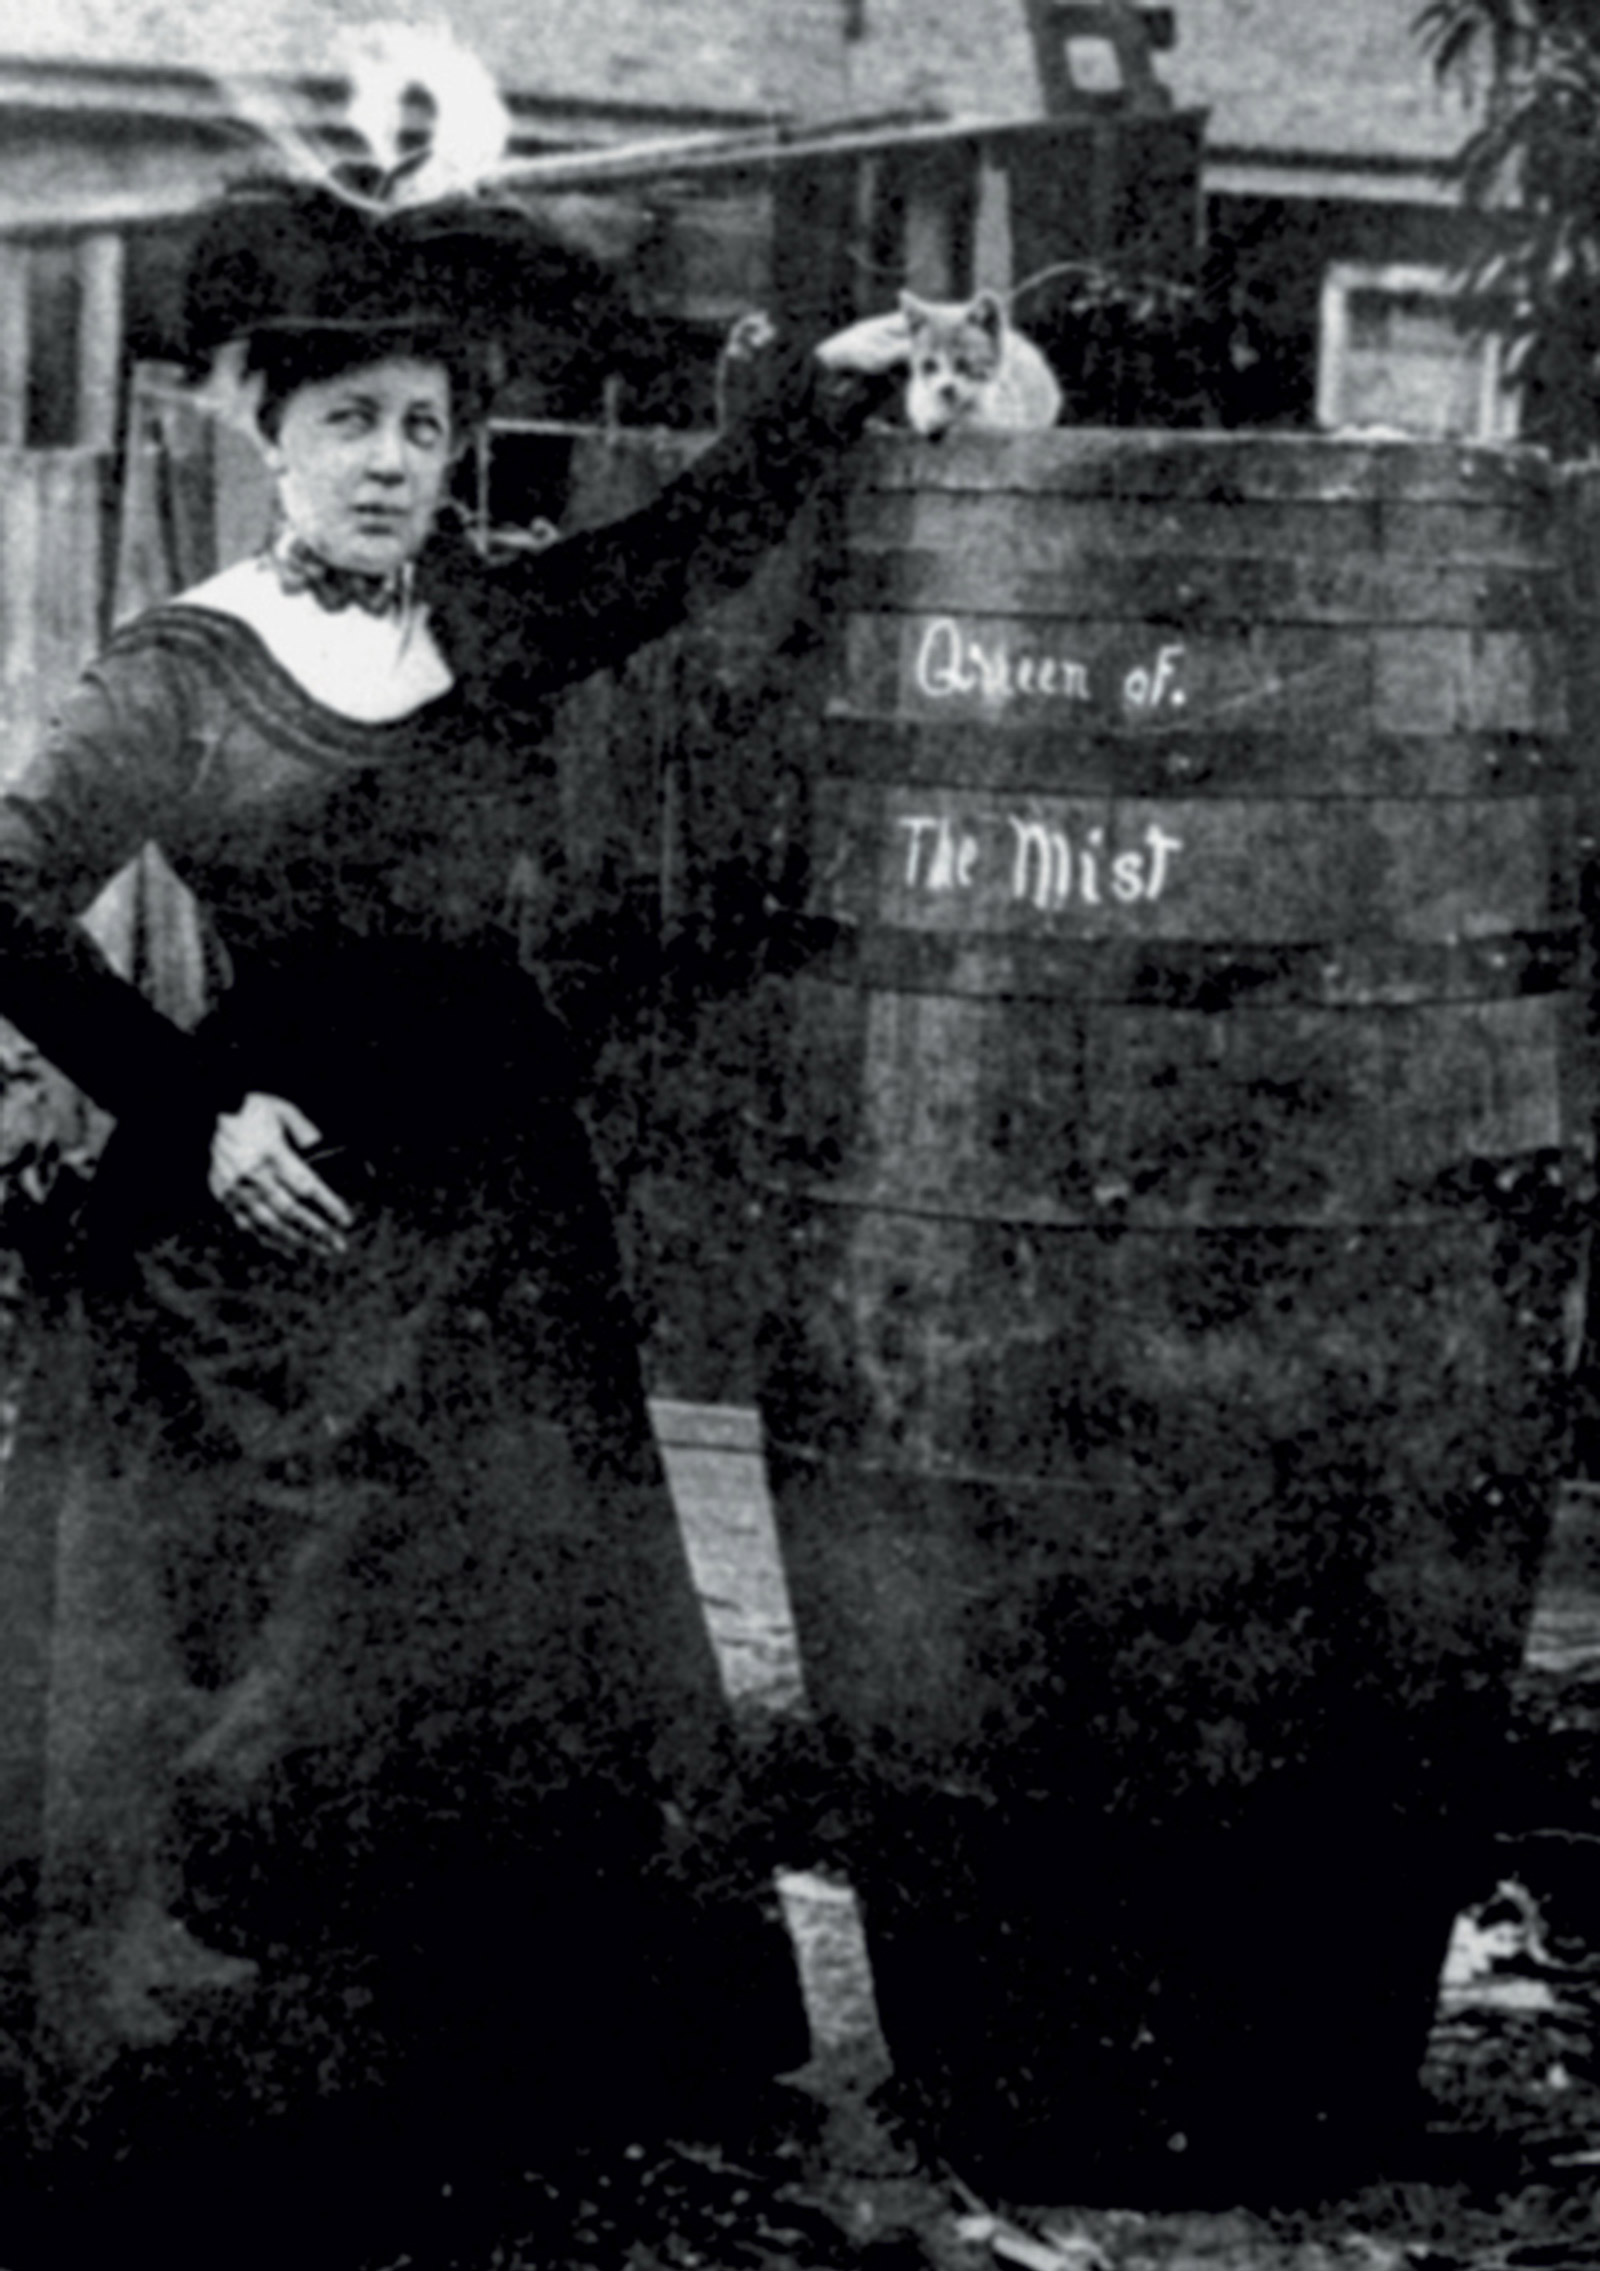 A photograph of Annie Edson Taylor standing next to her barrel.